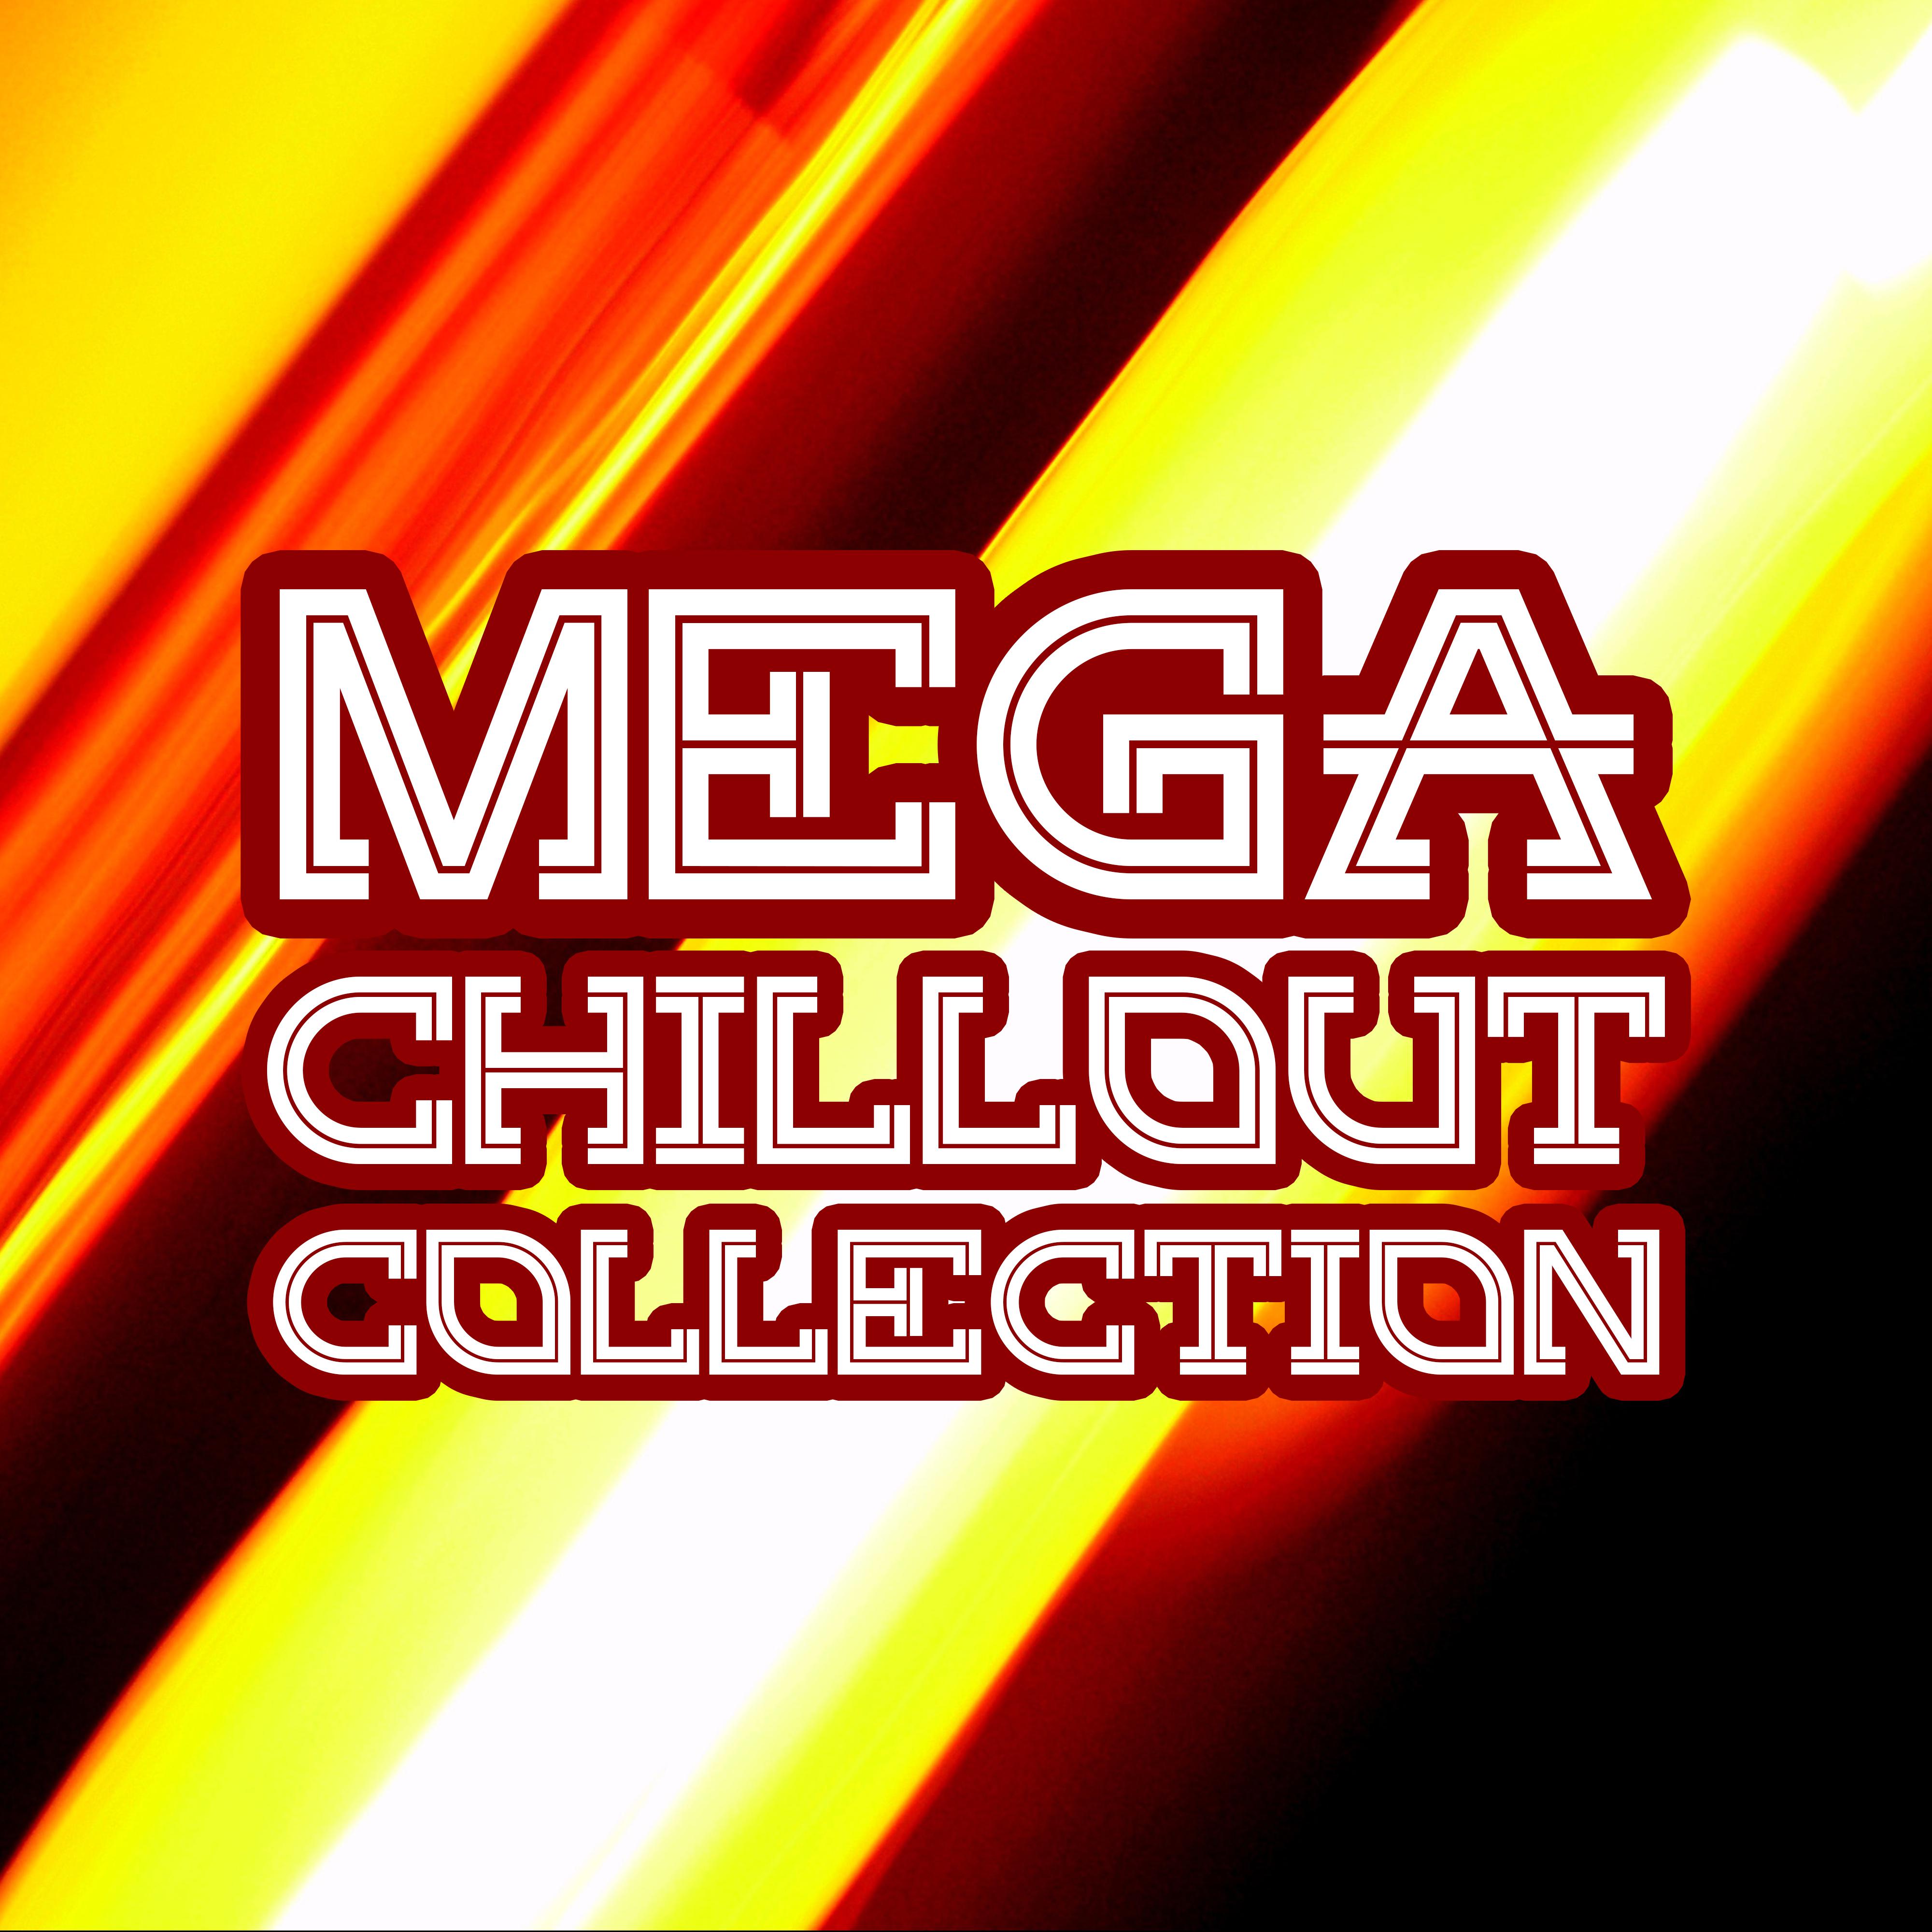 Mega Chillout Collection  Best Chill Out Music, Party Hits, Summer 2017, Relax Lounge